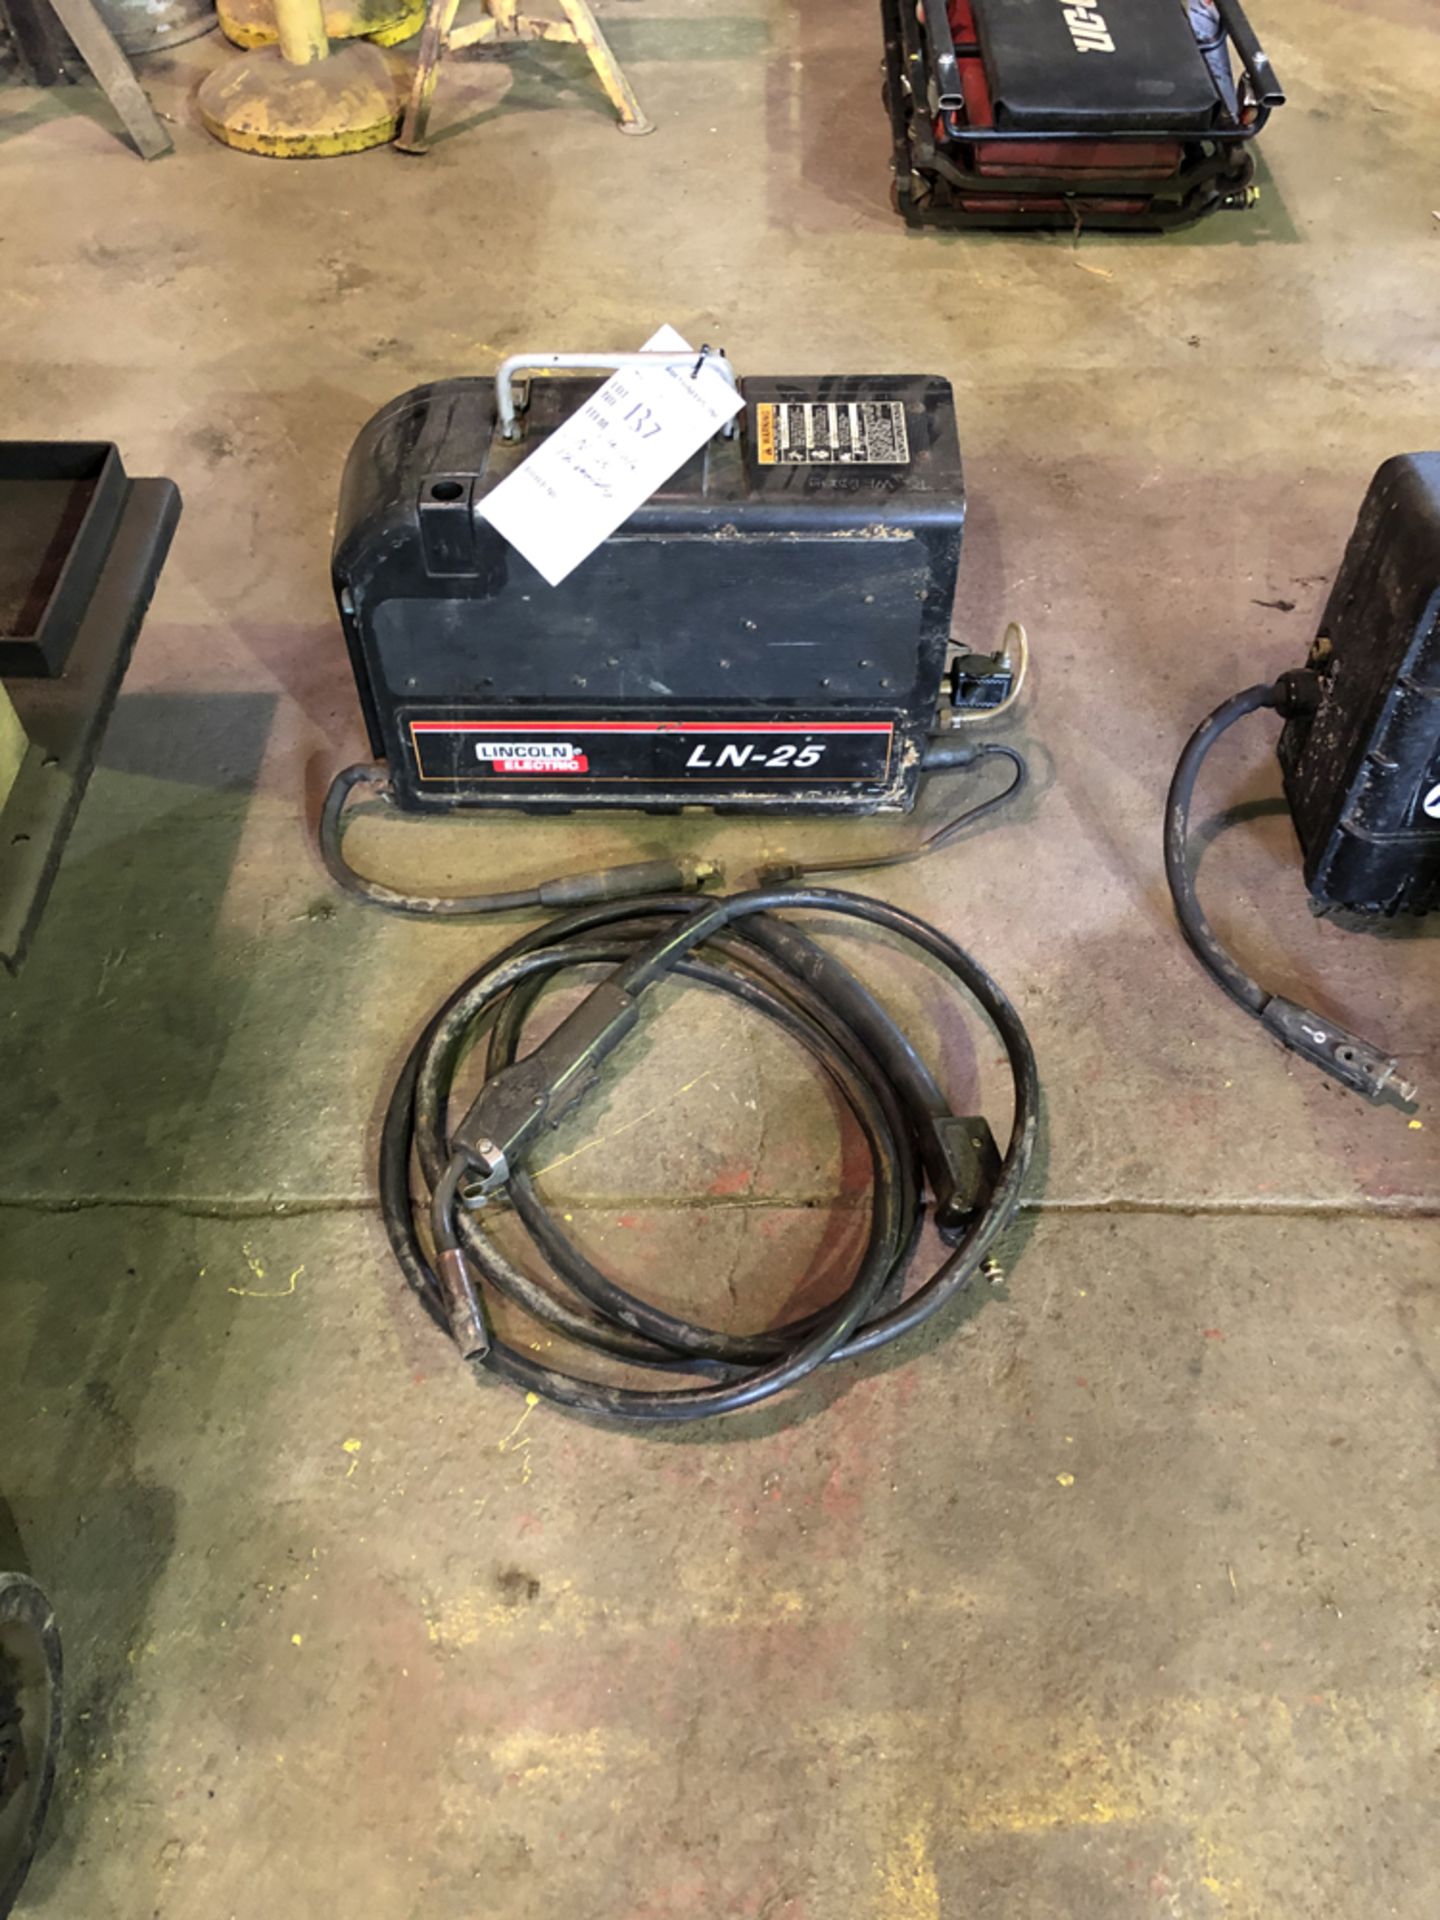 Lincoln model LN-25 single phase wire welder - Image 2 of 3